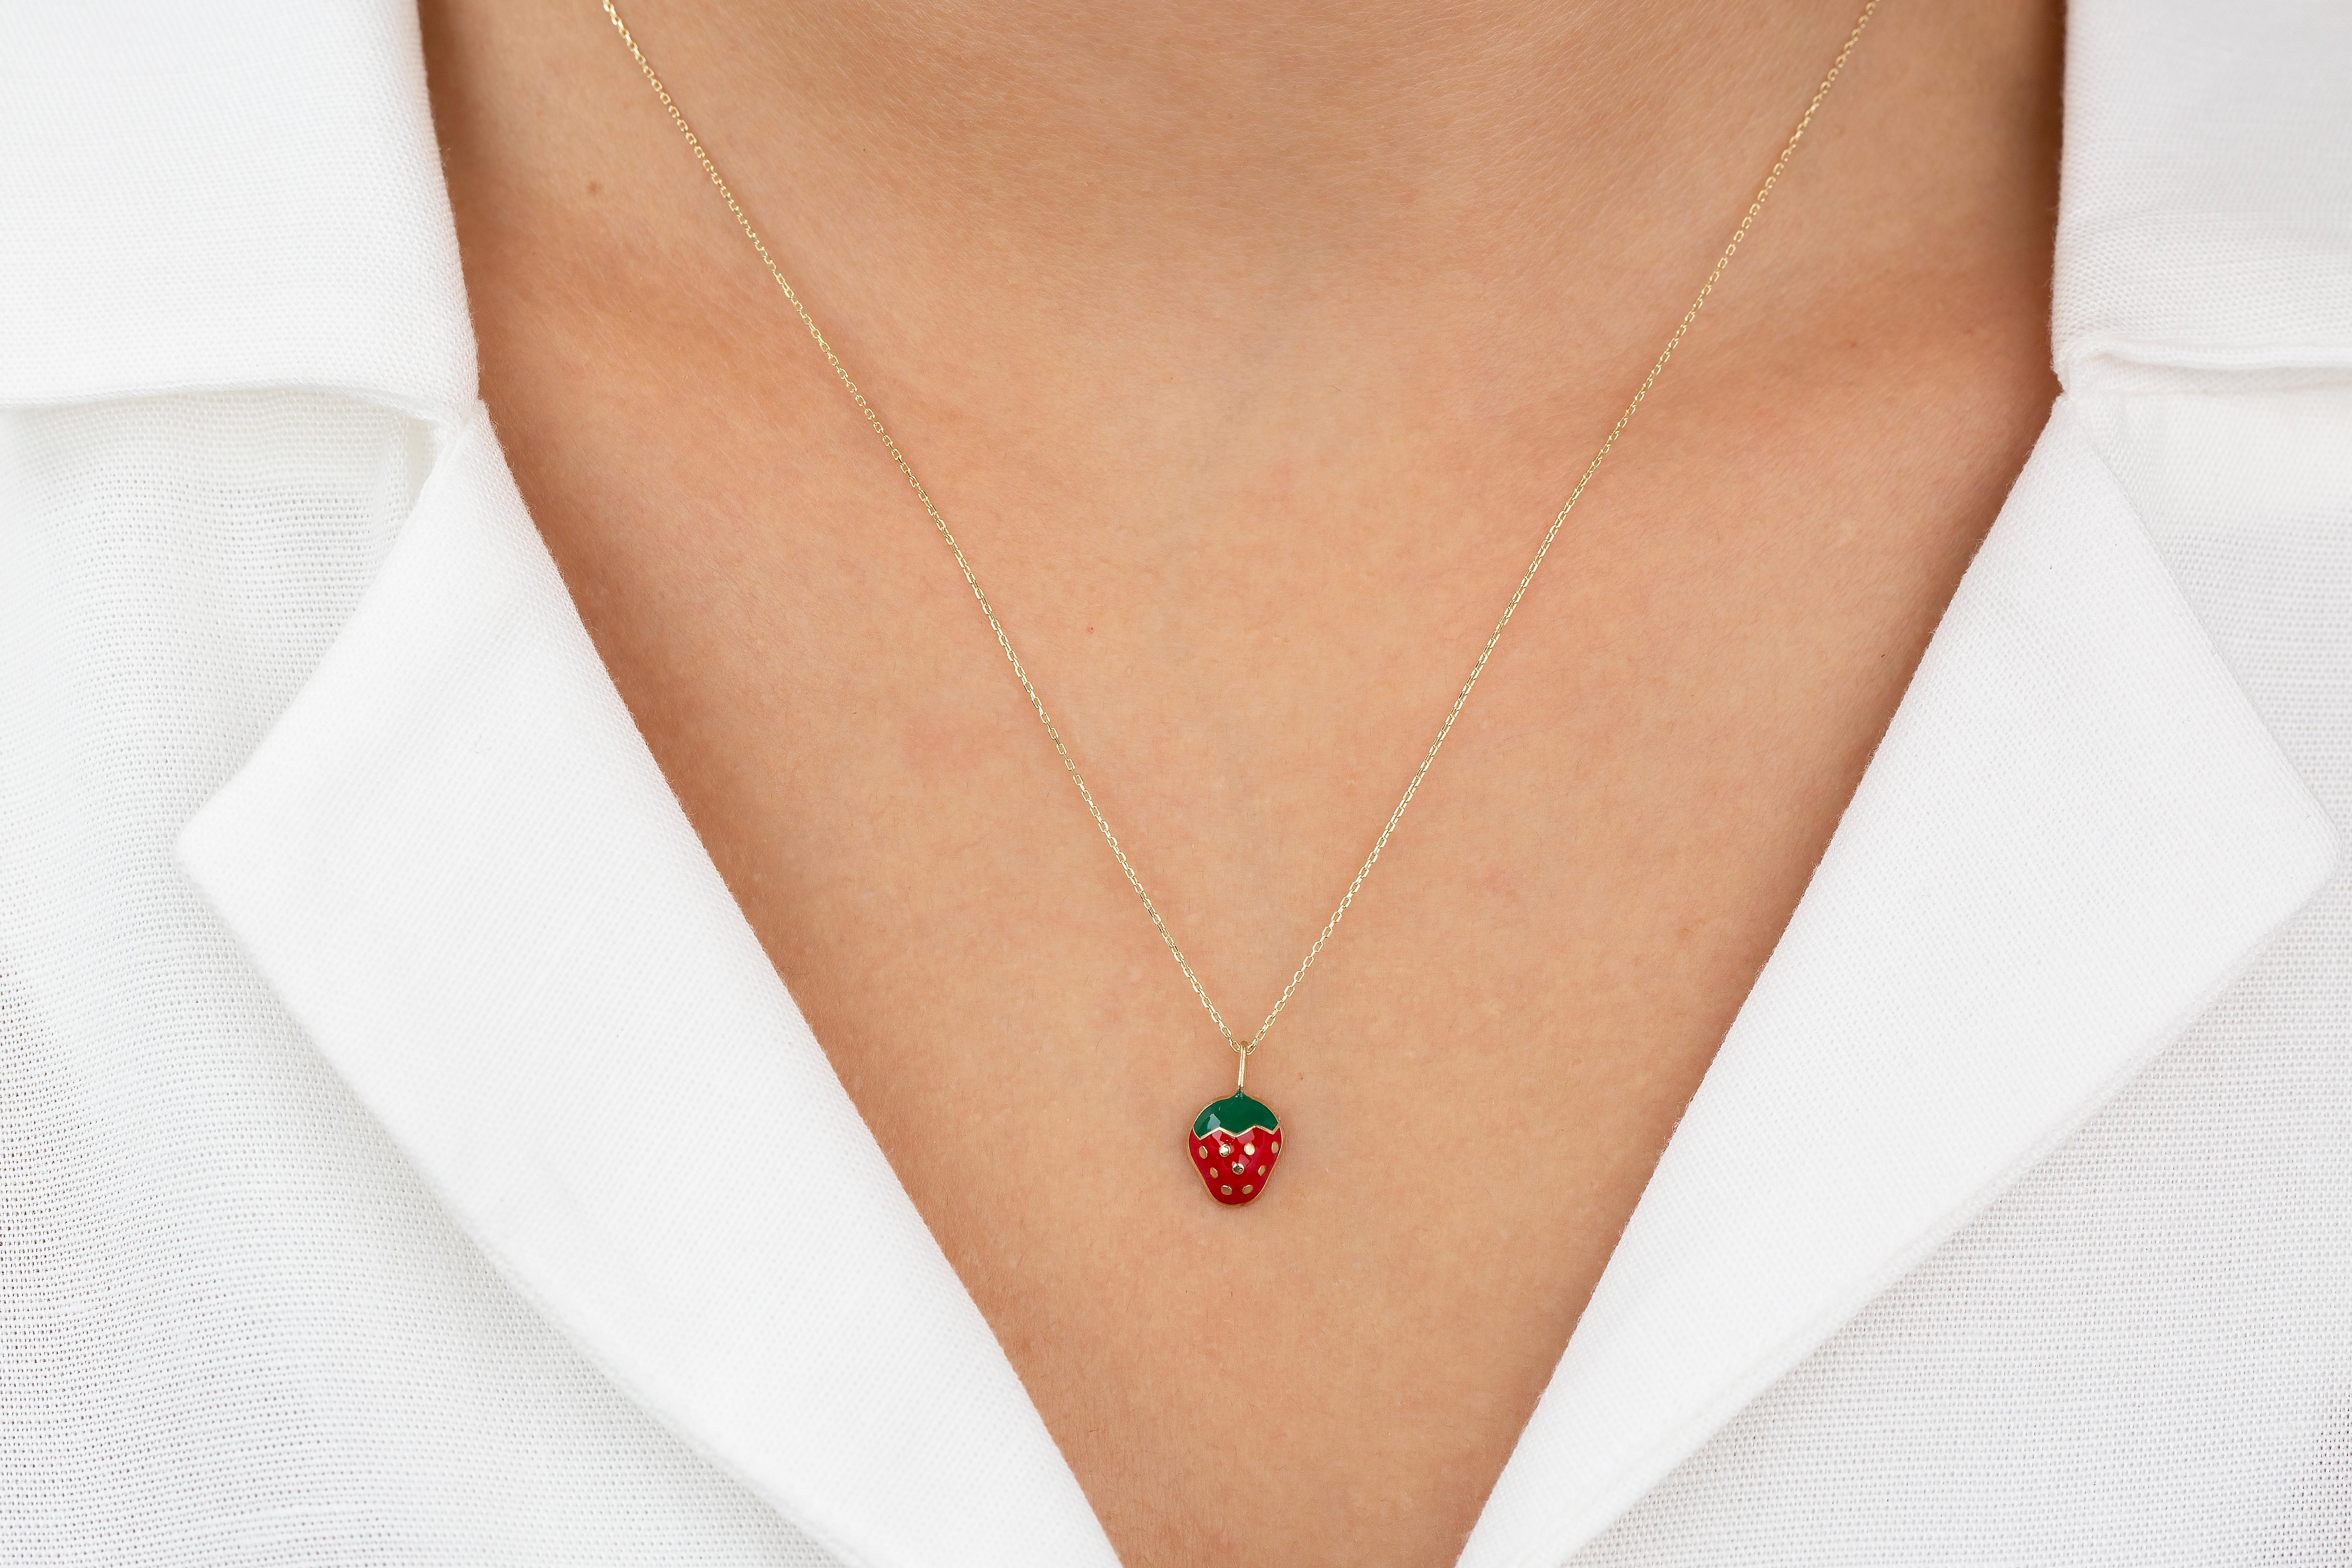 14K Gold Strawberry Necklace - Enamel Fruit Necklace

Special desing necklace with enamel. It’s a manual labour product. ‘Handmade’. Fashionable product. 

This necklace was made with quality materials and excellent handwork. I guarantee  the